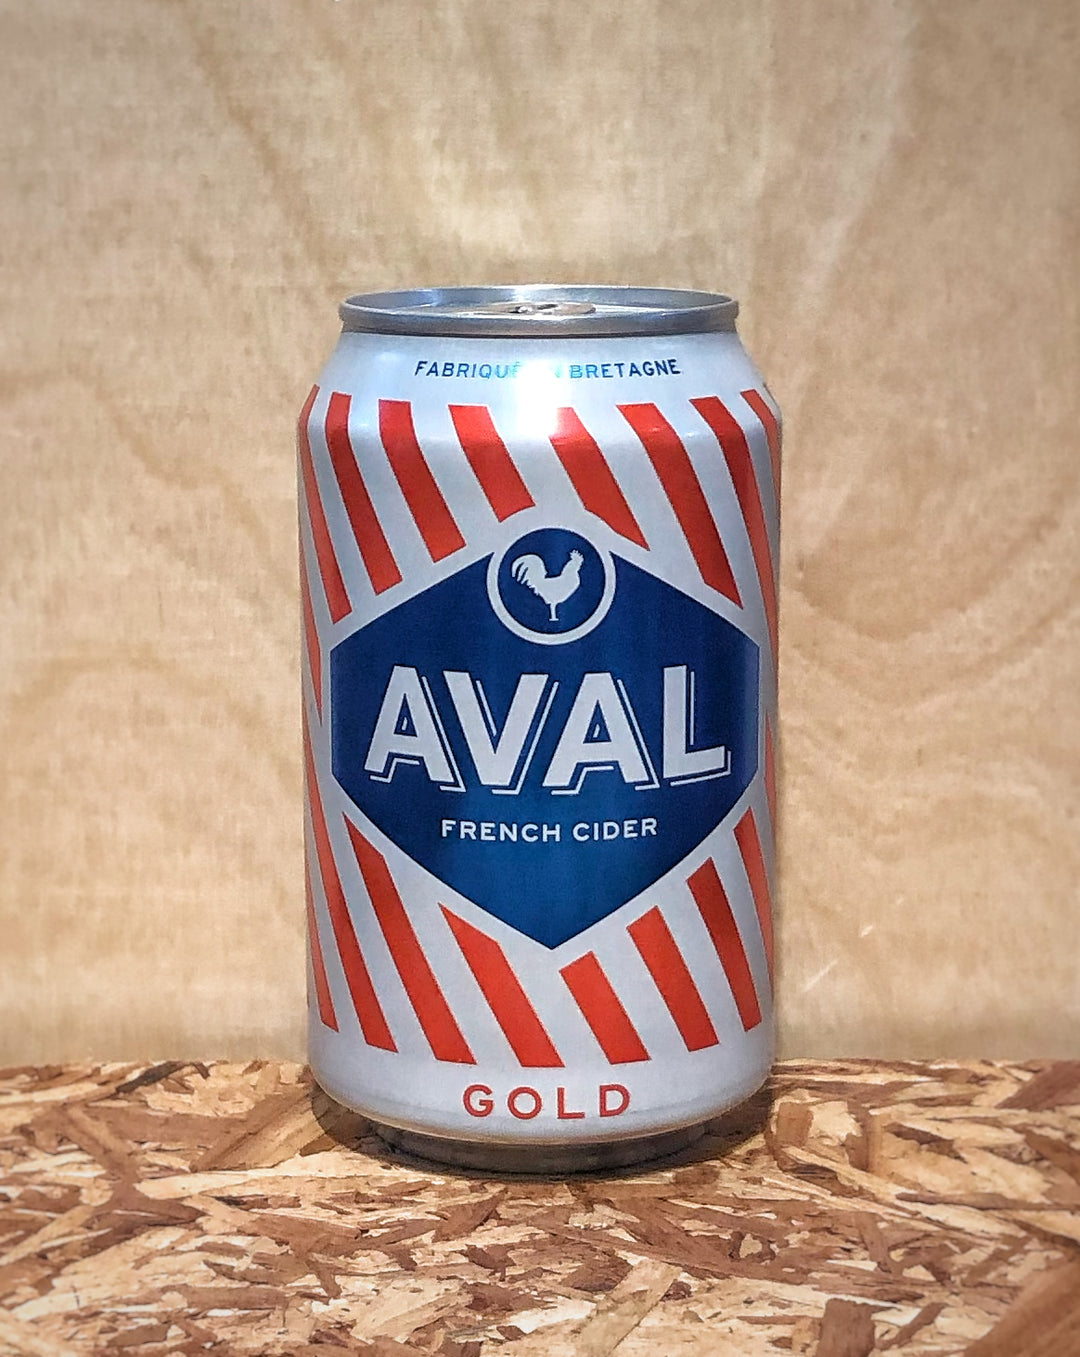 Aval Gold French Cider NV (Brittany, France)